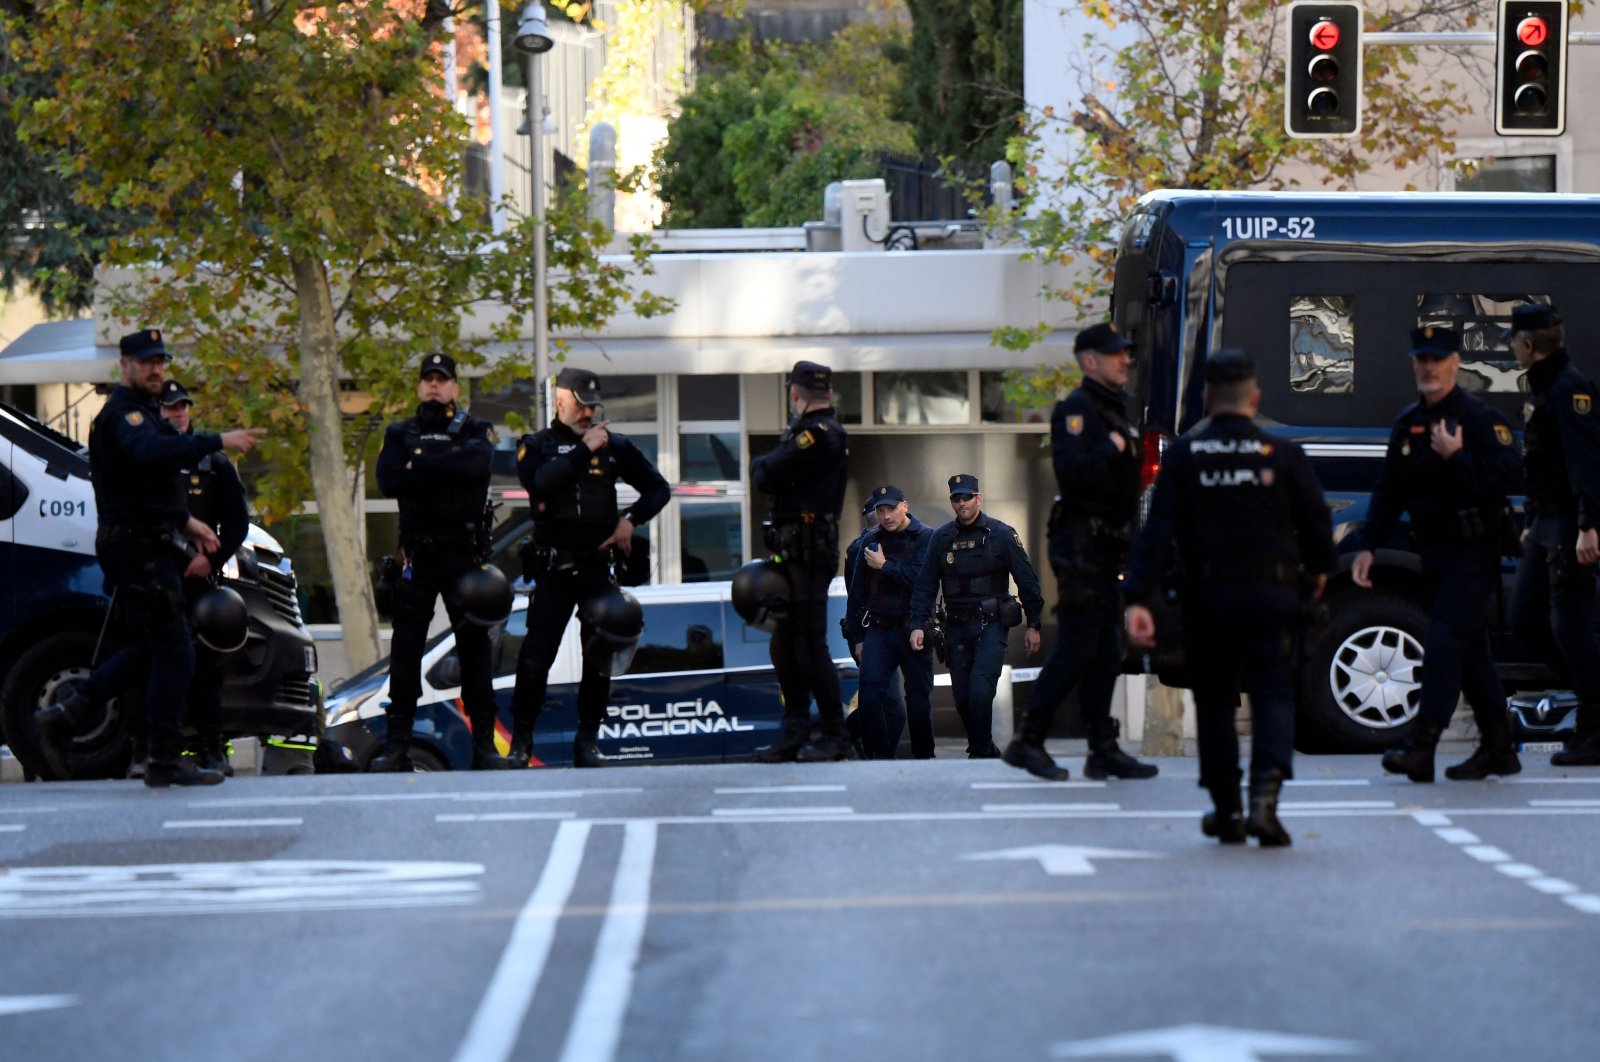 Police officers stand outside the U.S. Embassy in Madrid after a suspected explosive device hidden in an envelope was mailed to the embassy, in the wake of other packages sent to targets connected to Spanish support of Ukraine, amidst Russia’s invasion of Ukraine, in Madrid, Spain, Dec. 1, 2022. (AFP Photo)
